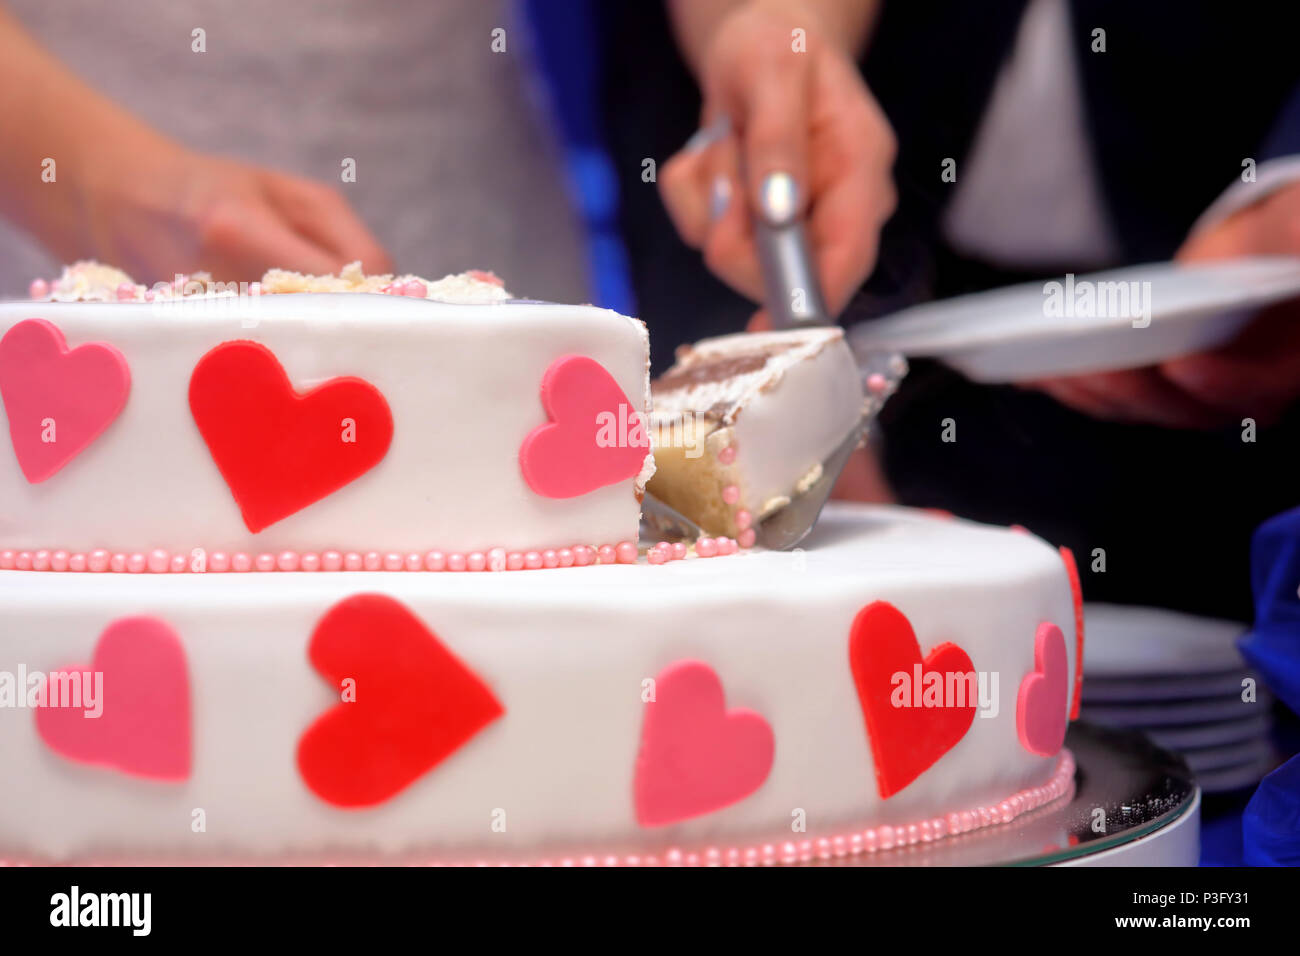 White wedding cake with red hearts on wedding party Stock Photo